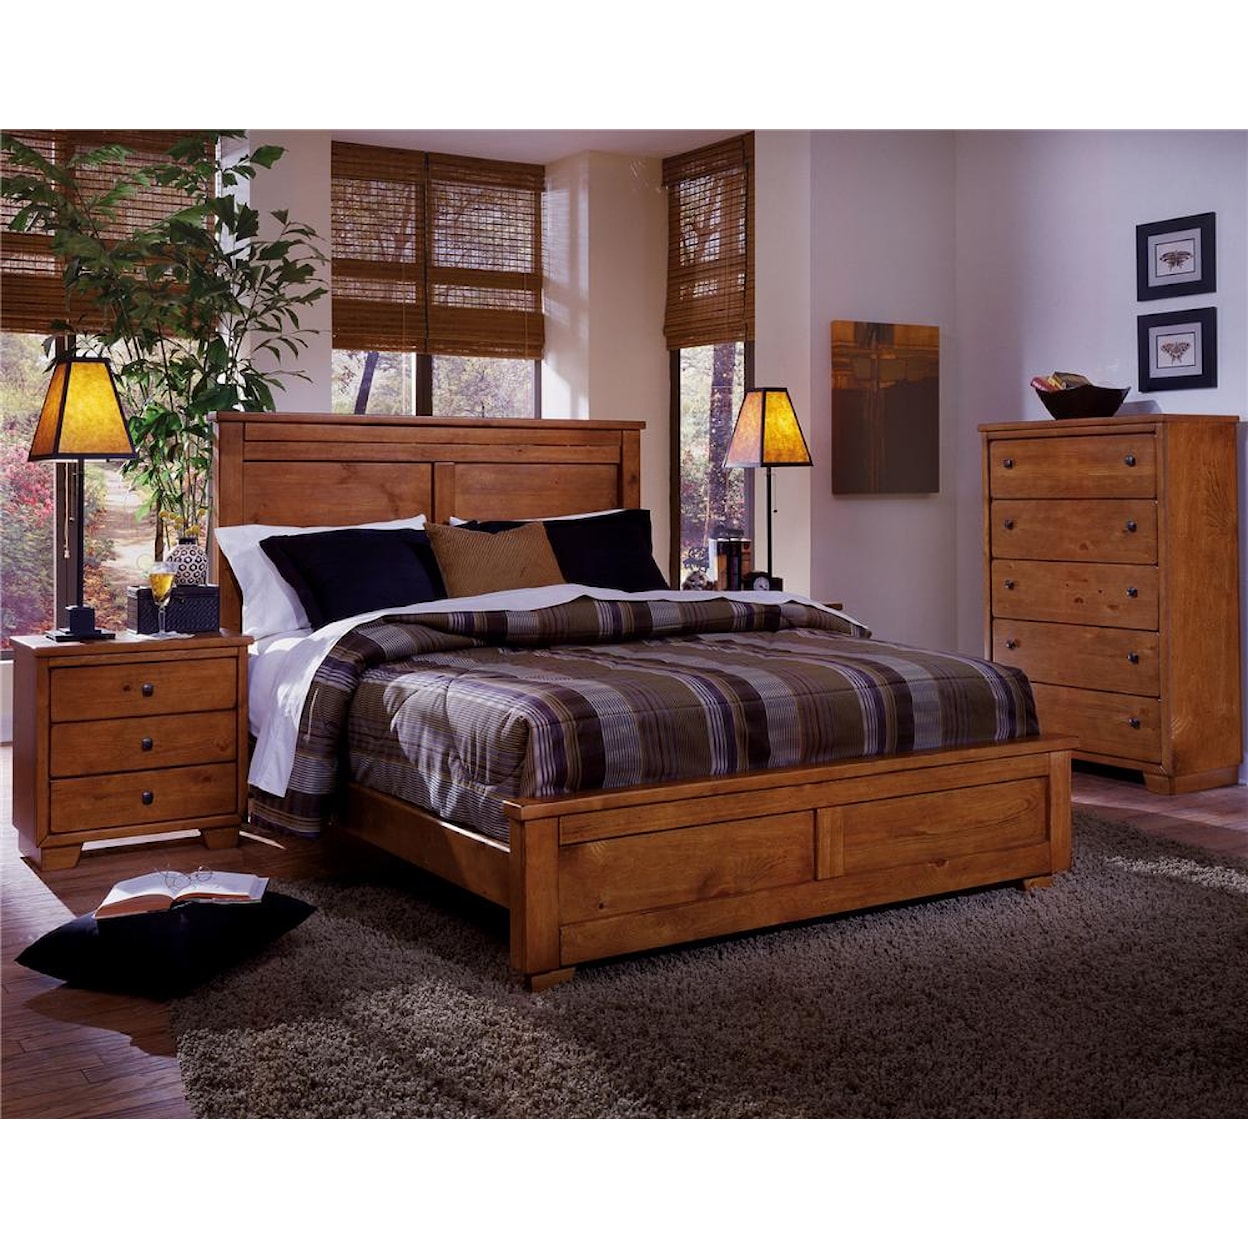 Carolina Chairs Diego Queen Panel Bed